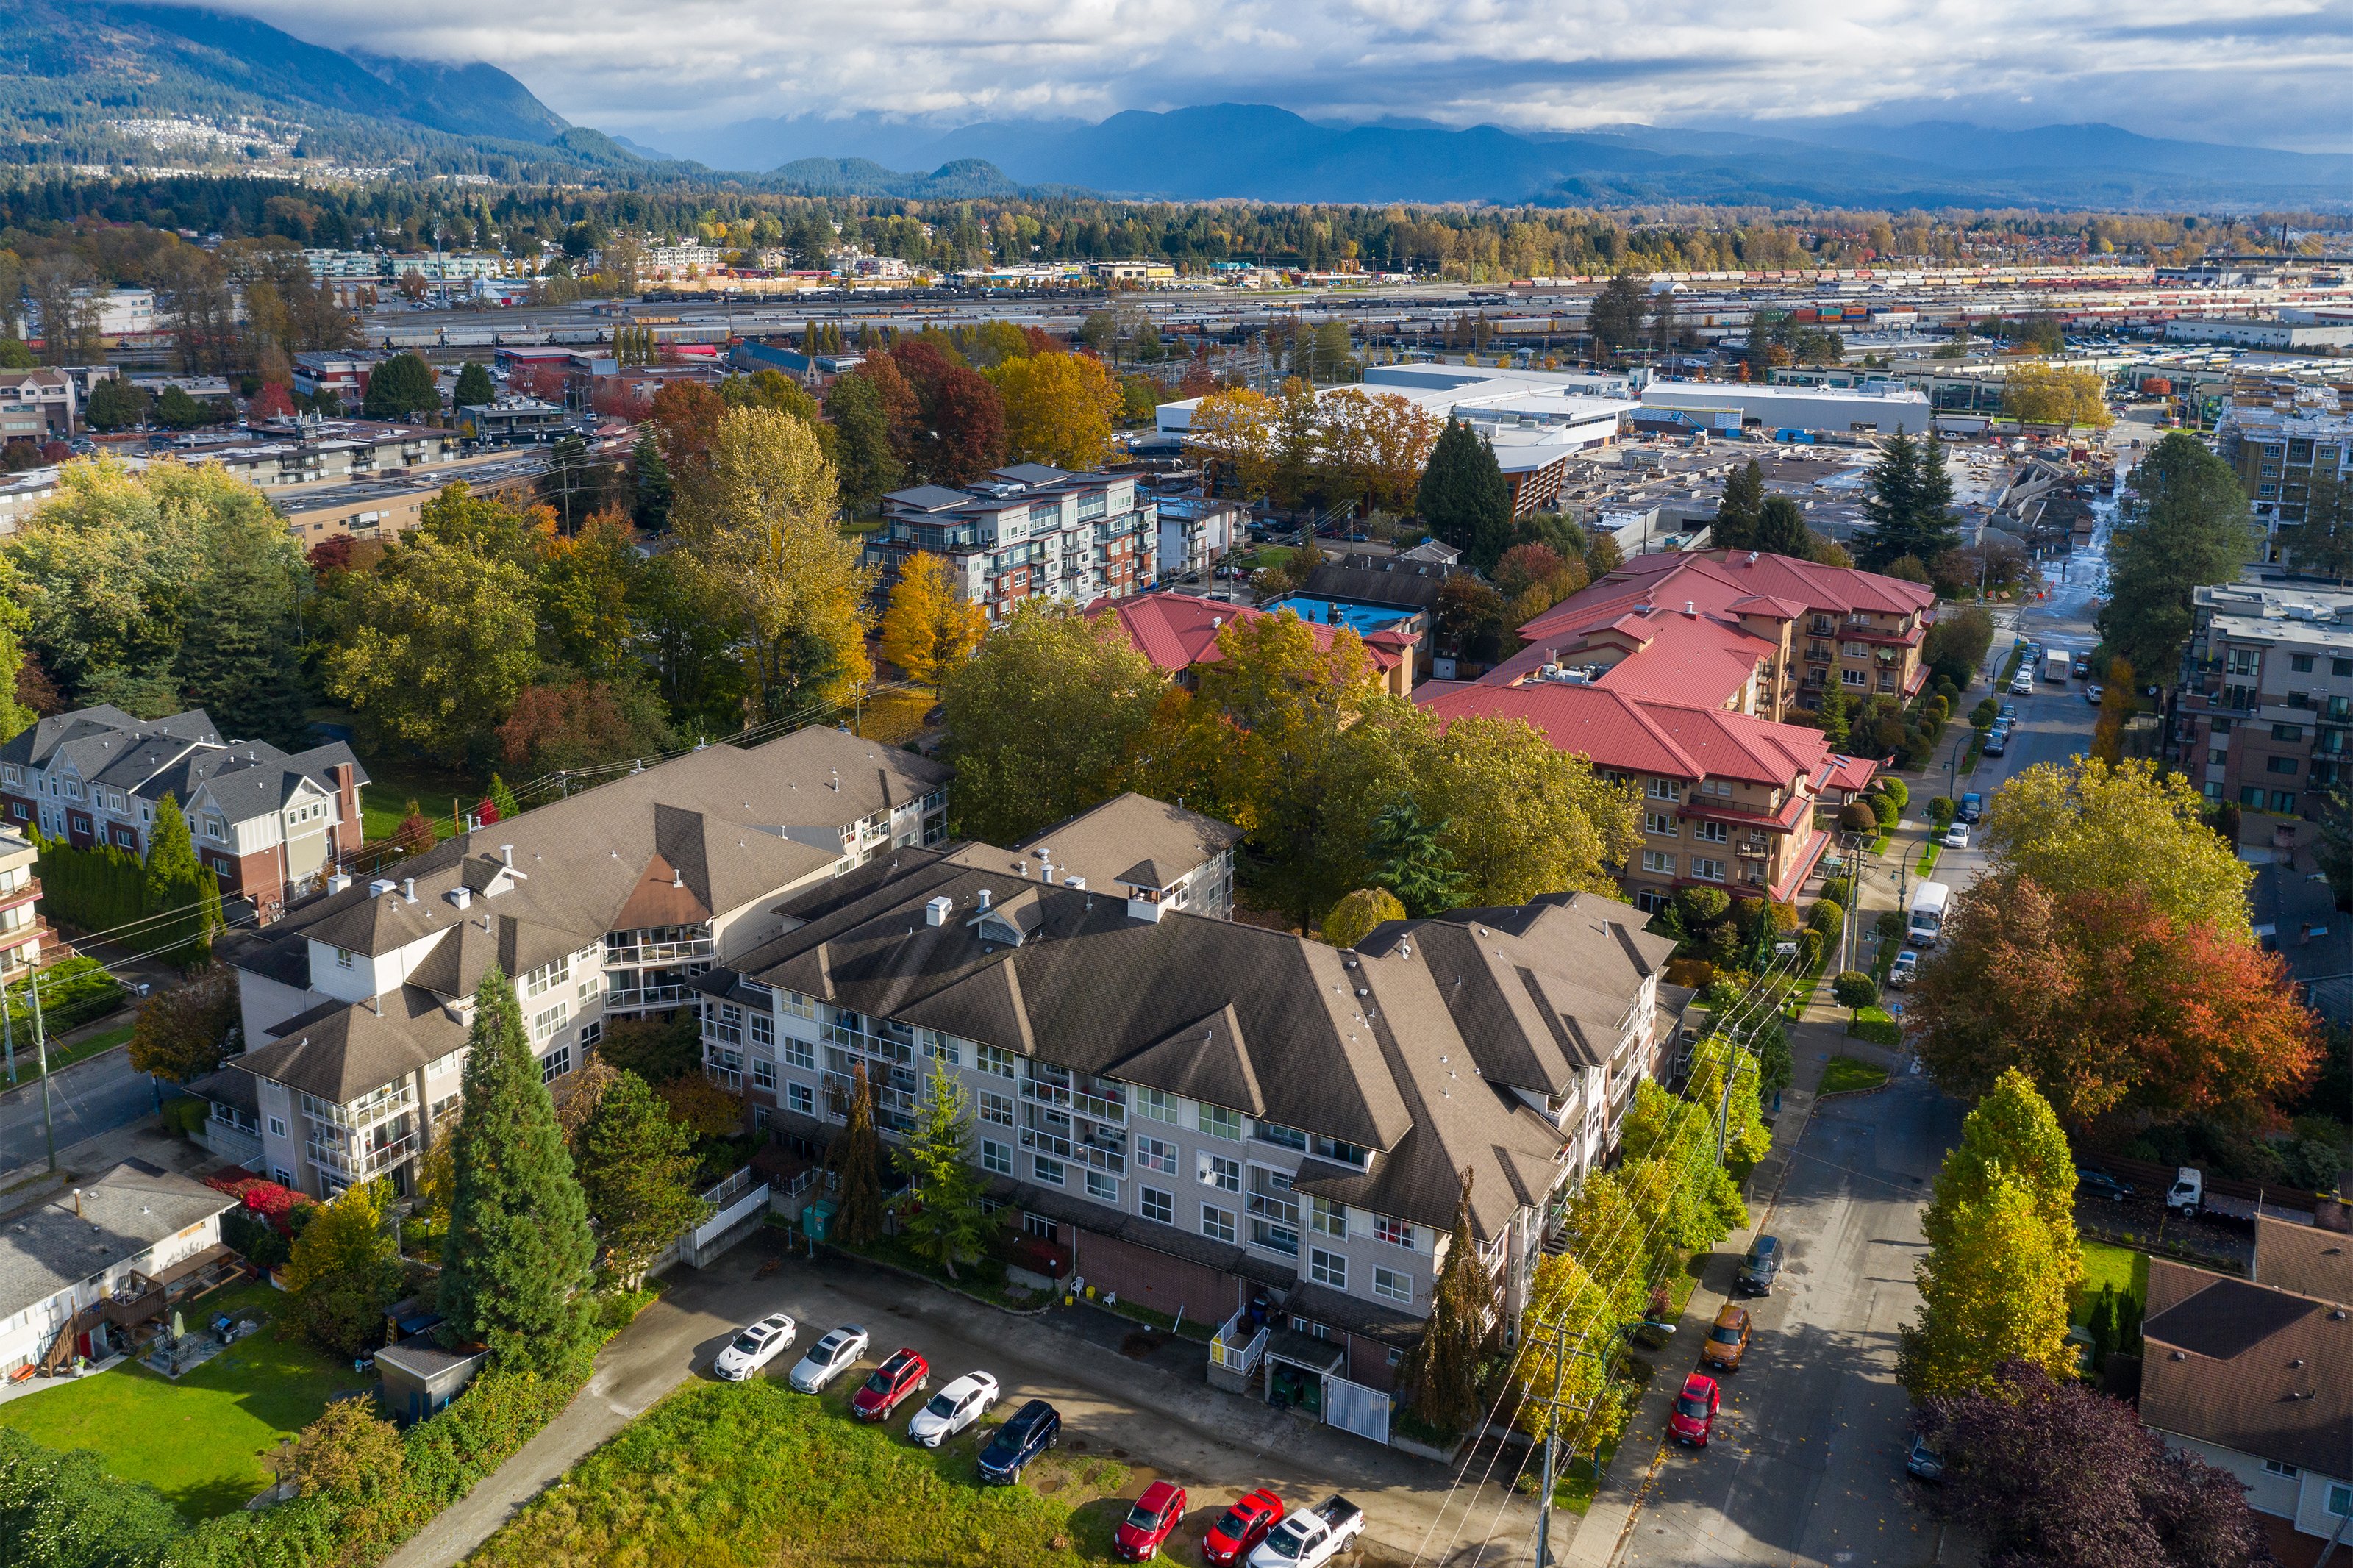 Panoramic view of Mayfair Terrace Retirement Residence in Port Coquitlam